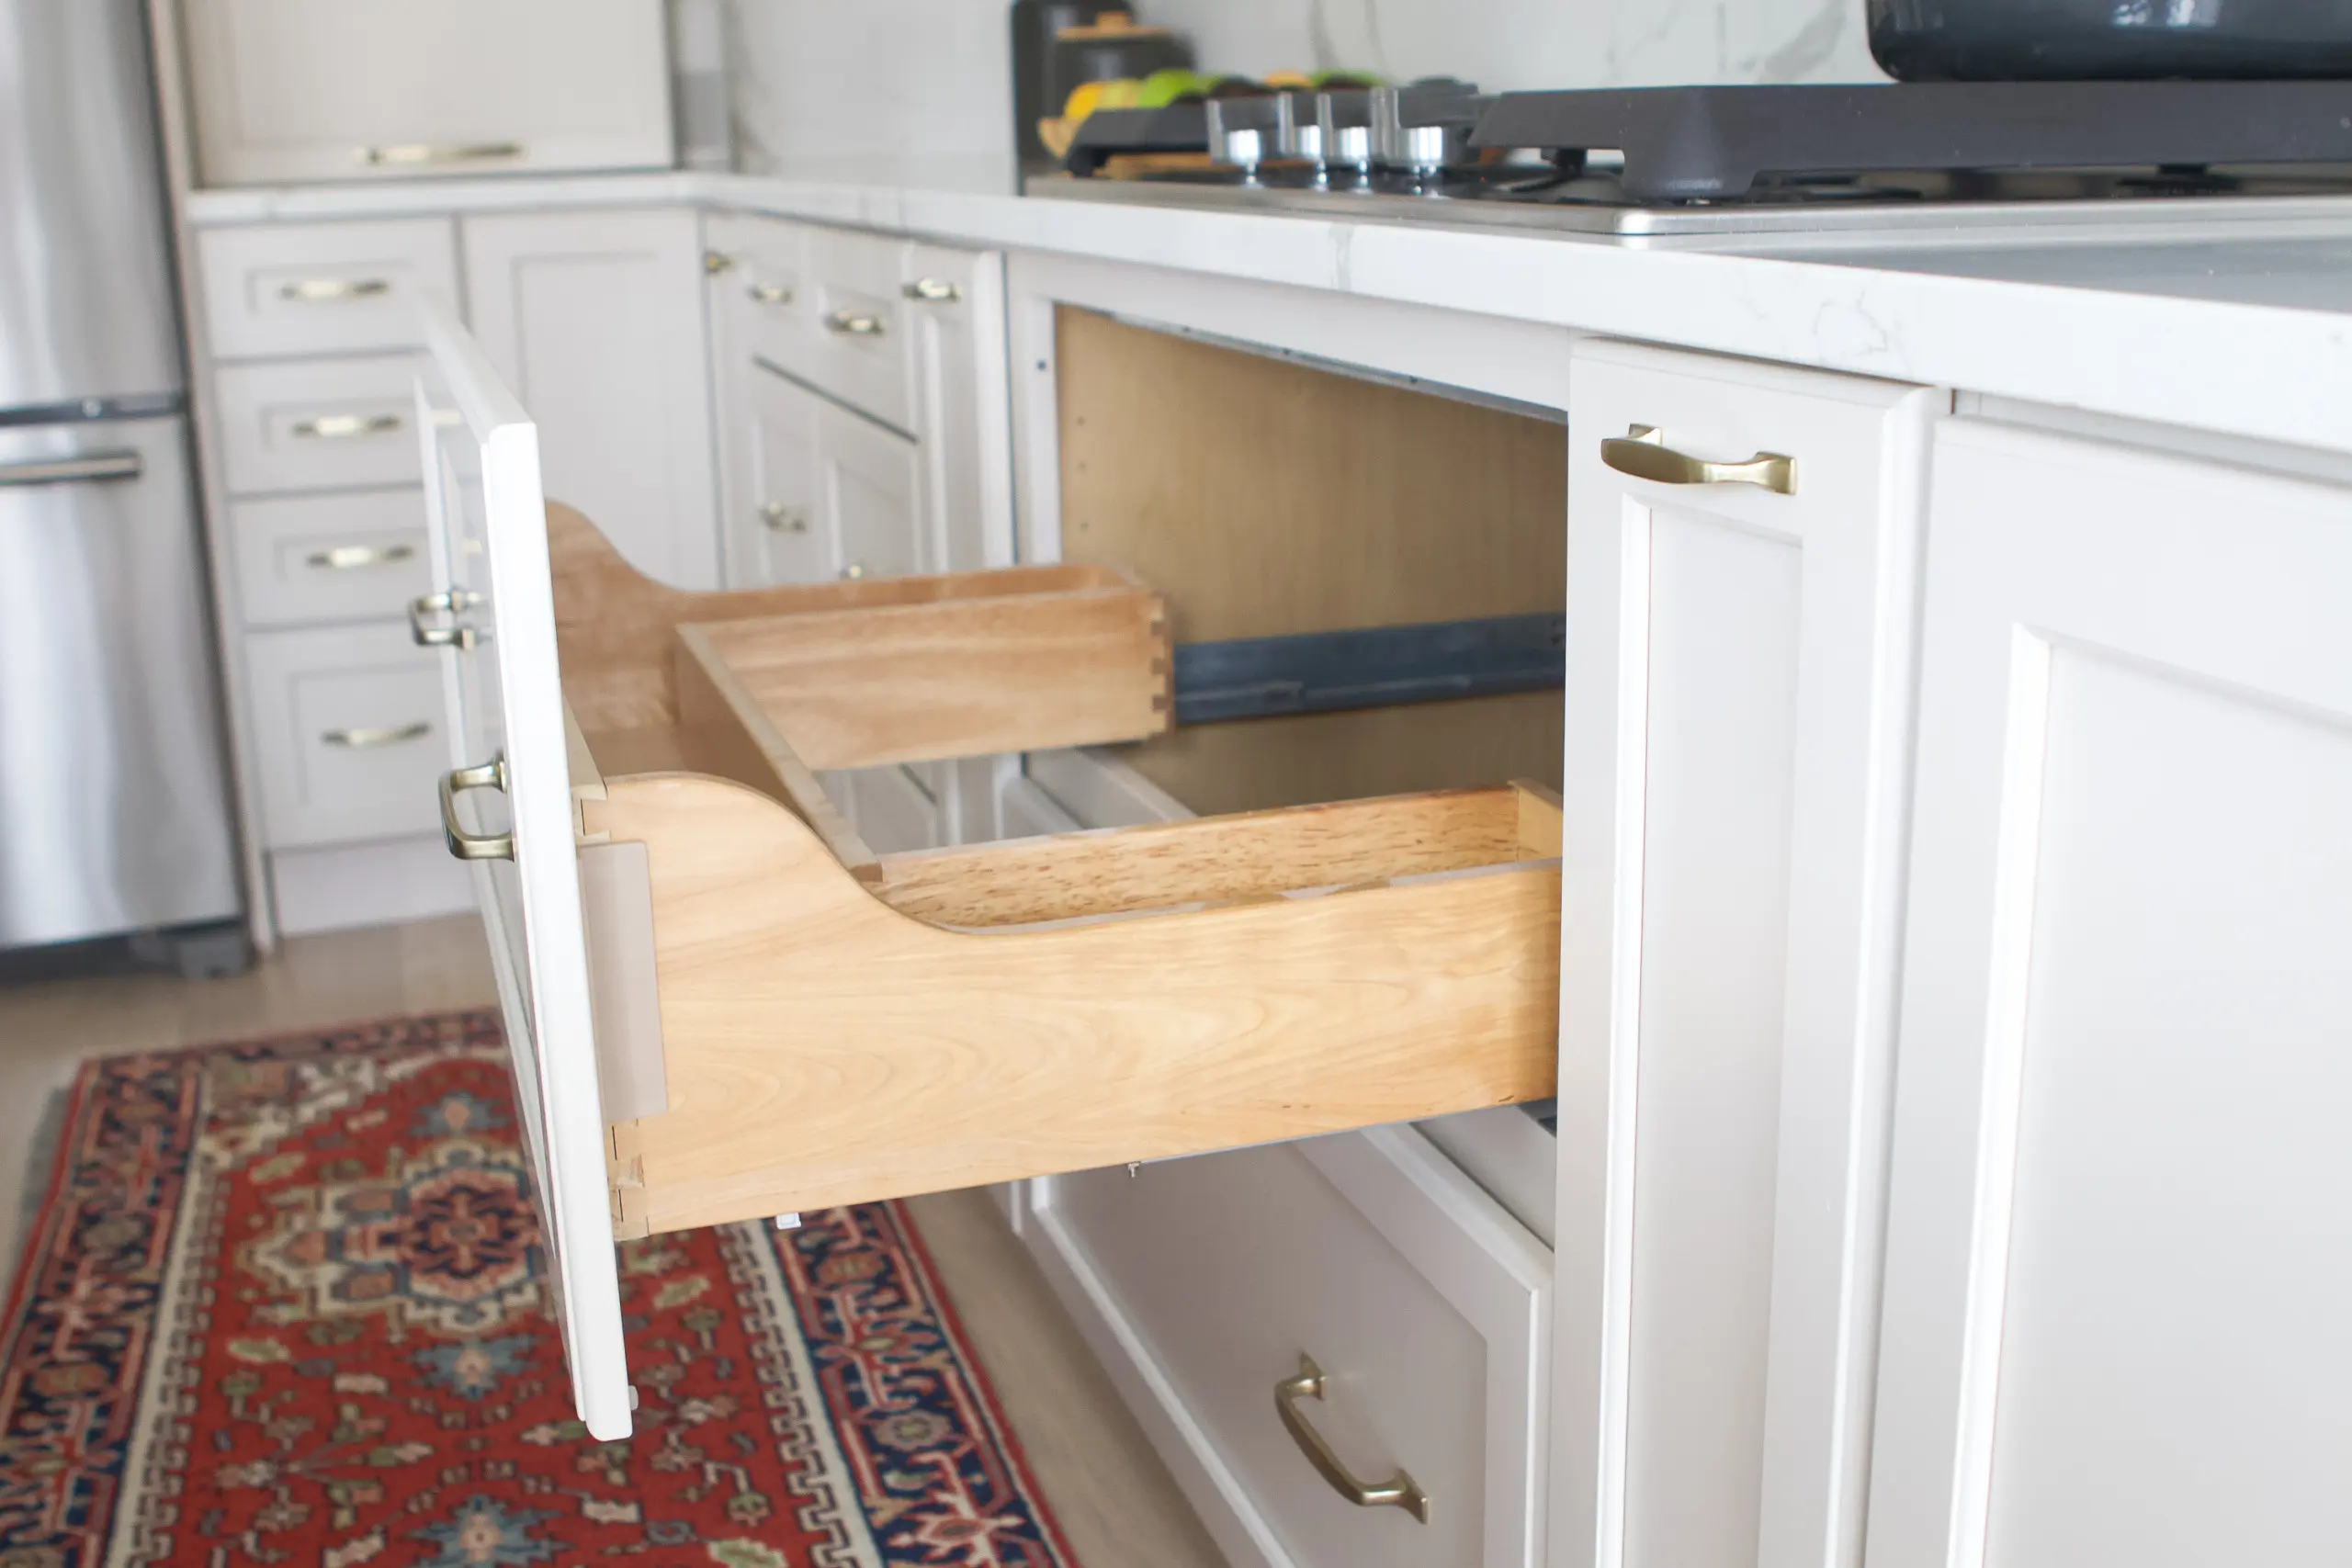 U-shaped drawer underneath the stovetop